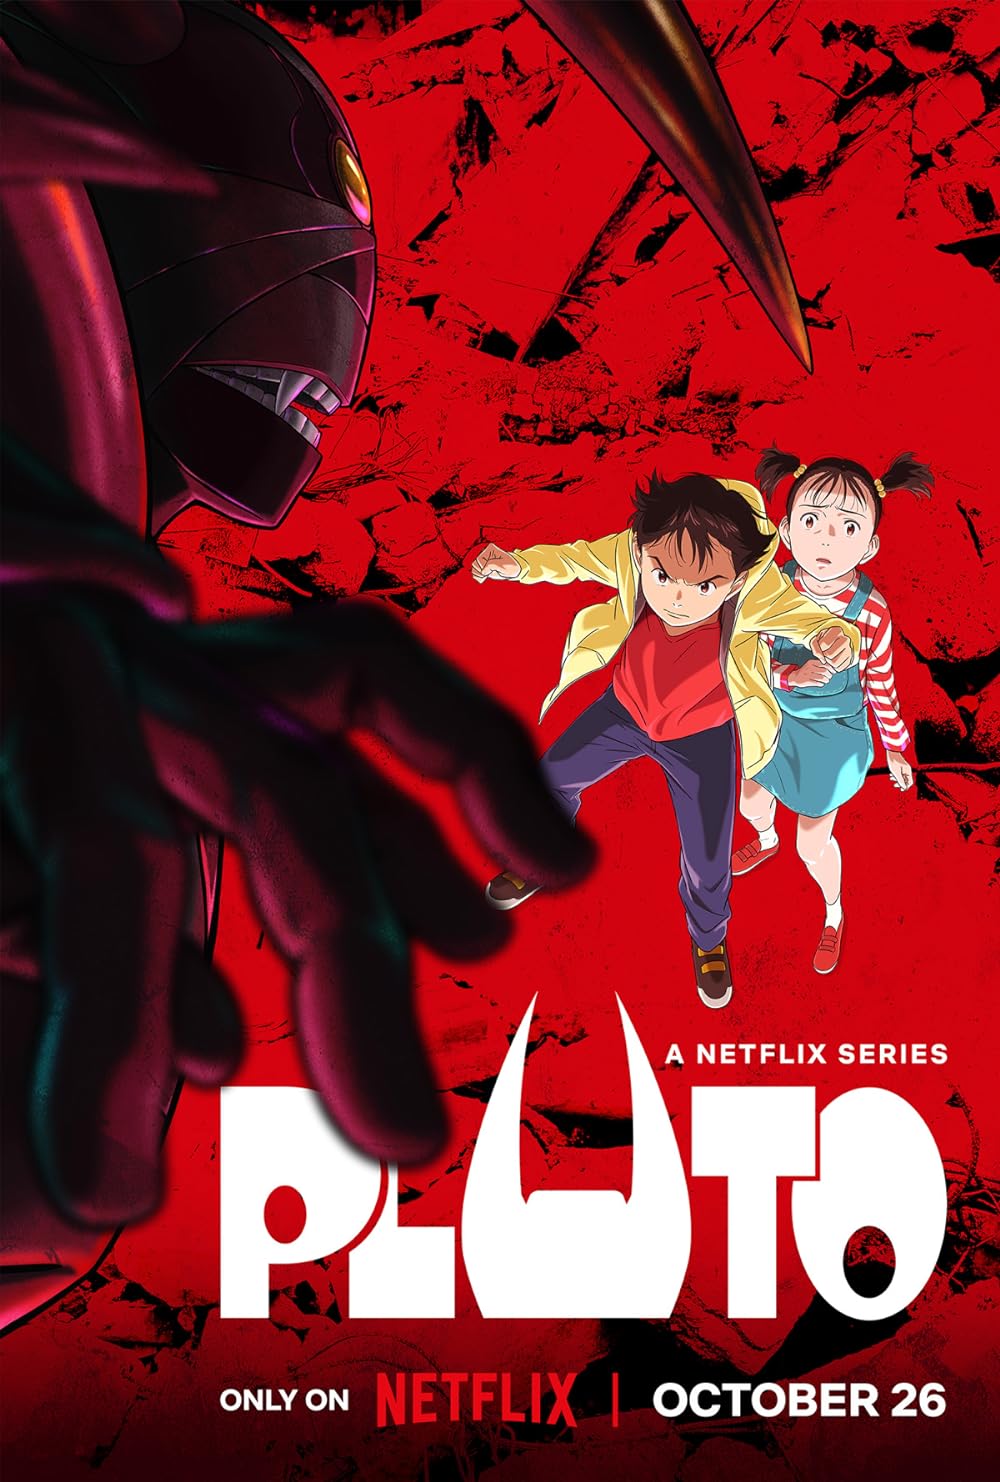 Read More About The Article Pluto S01 (Episode 1-8 Adedd) | Japanese Animation